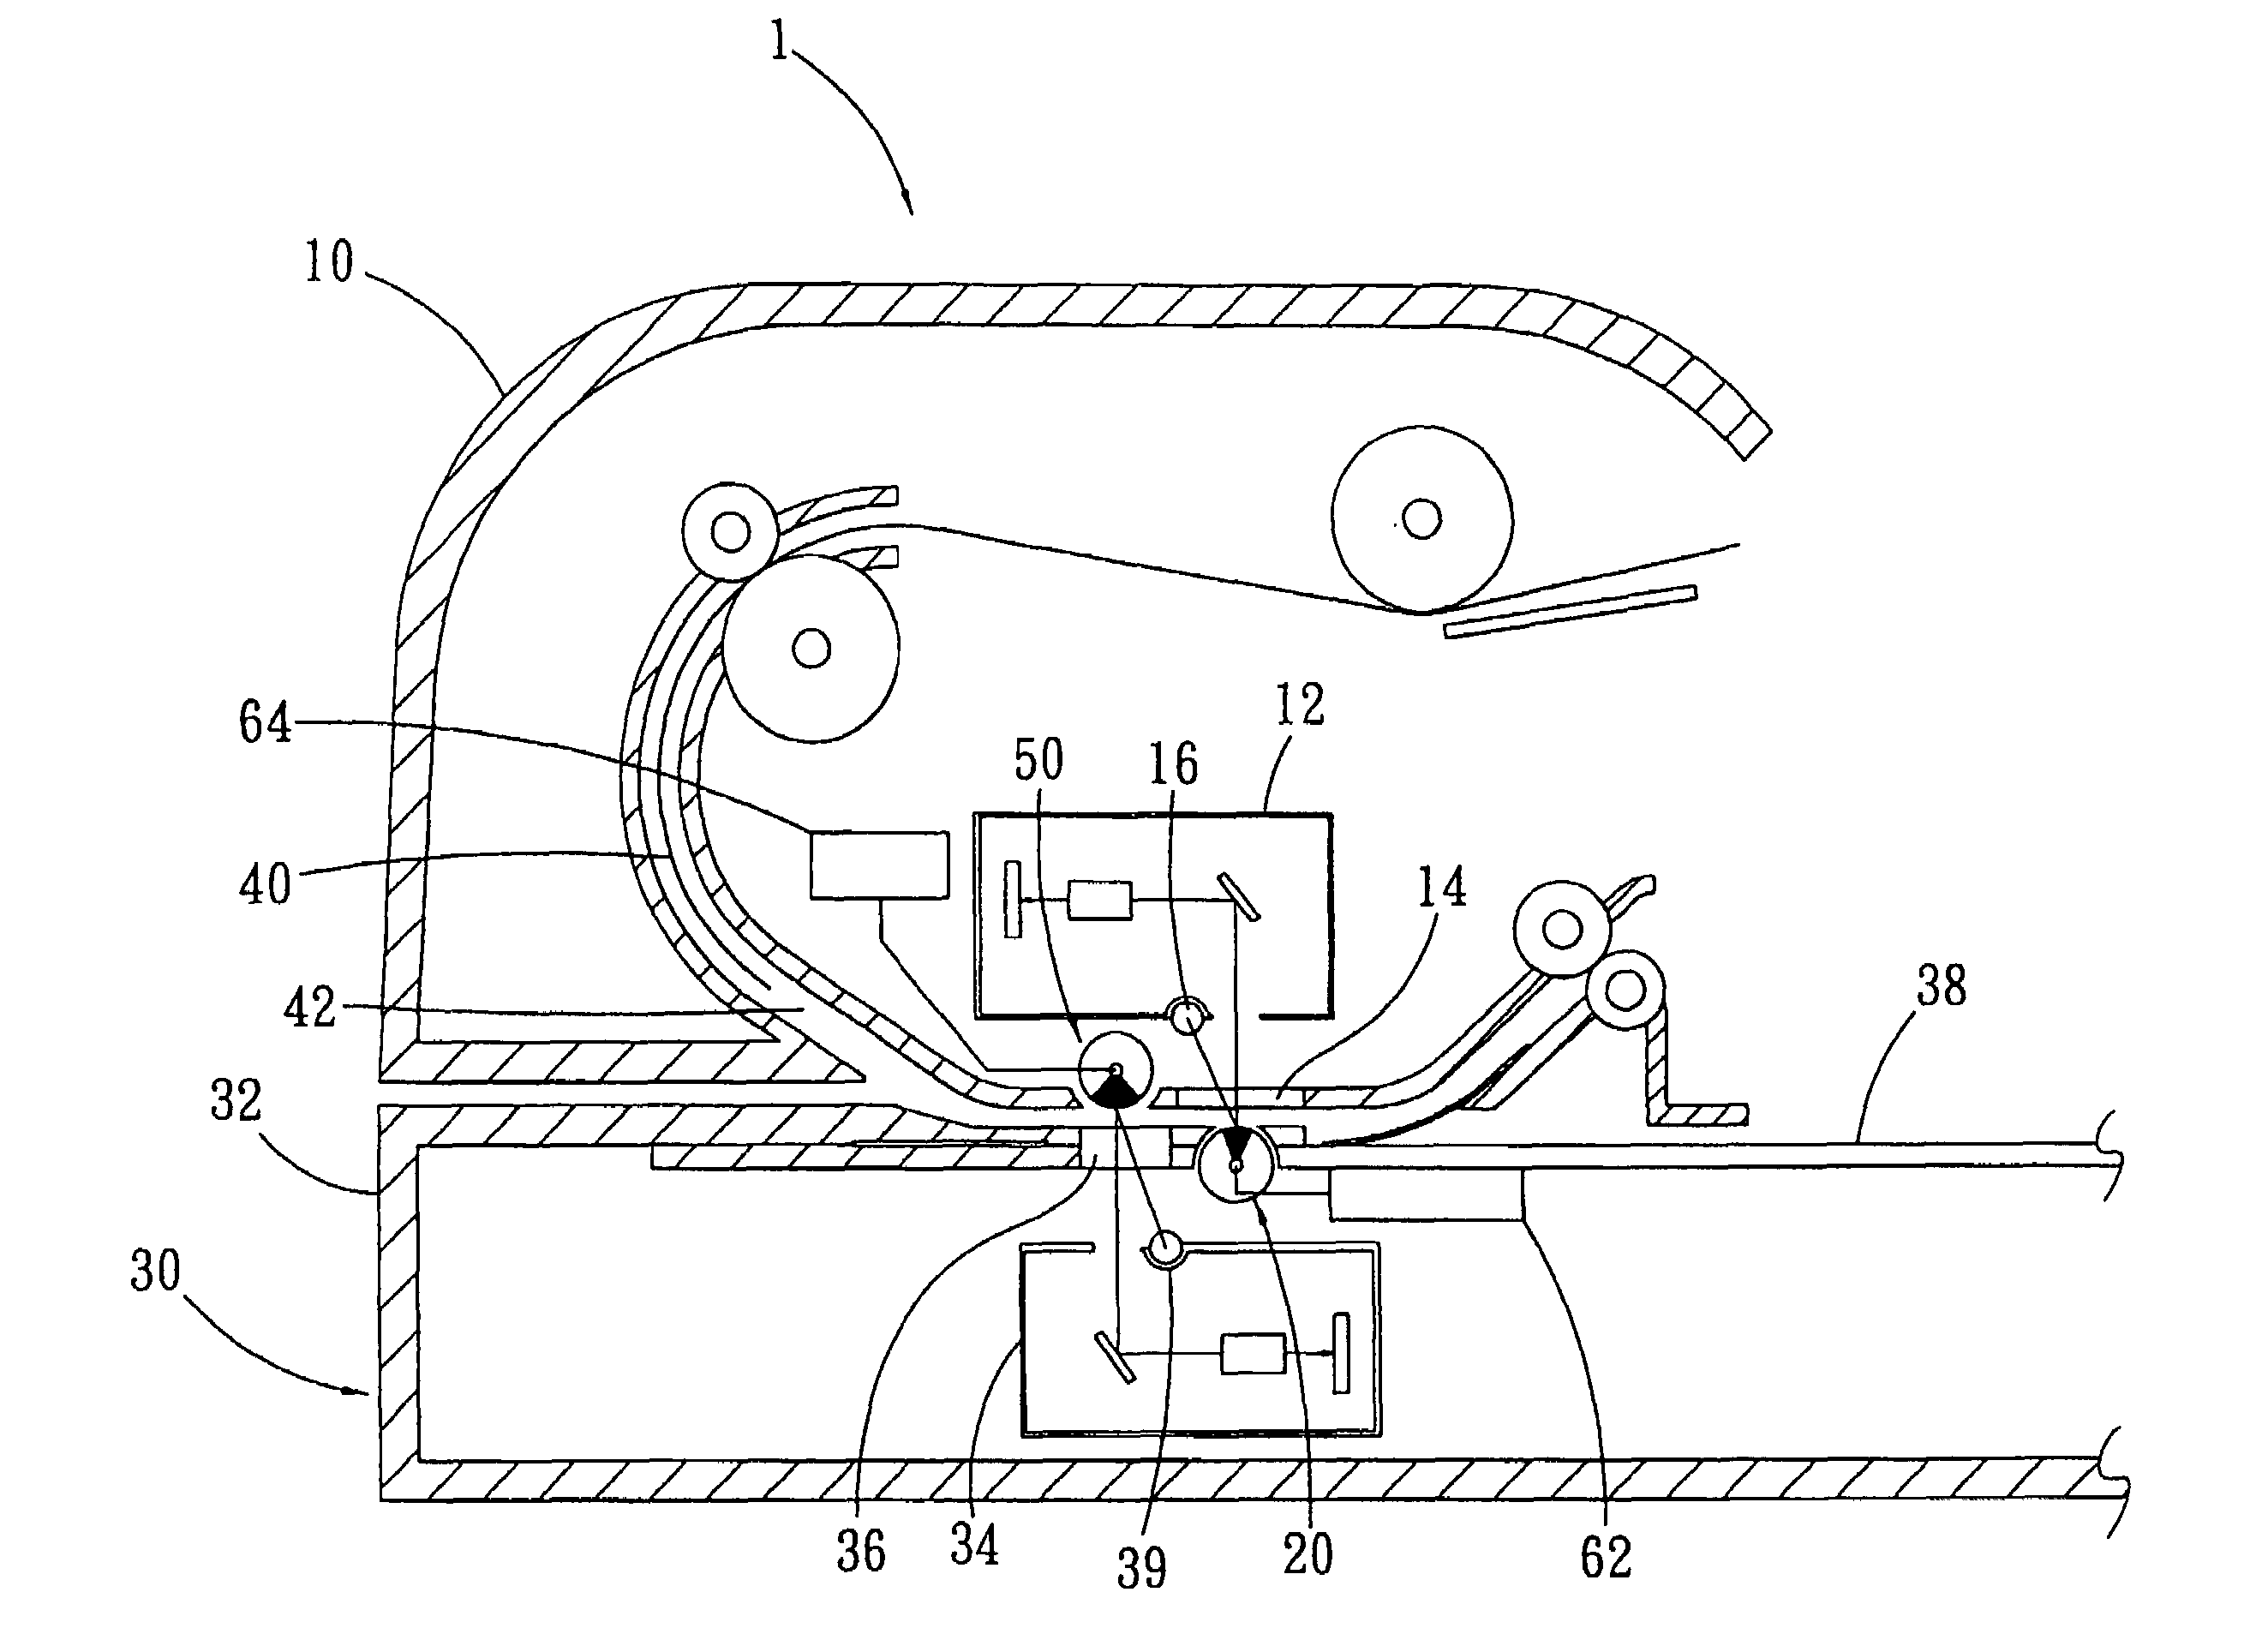 Multiple-background device for a scanner and calibration device utilizing the same principle